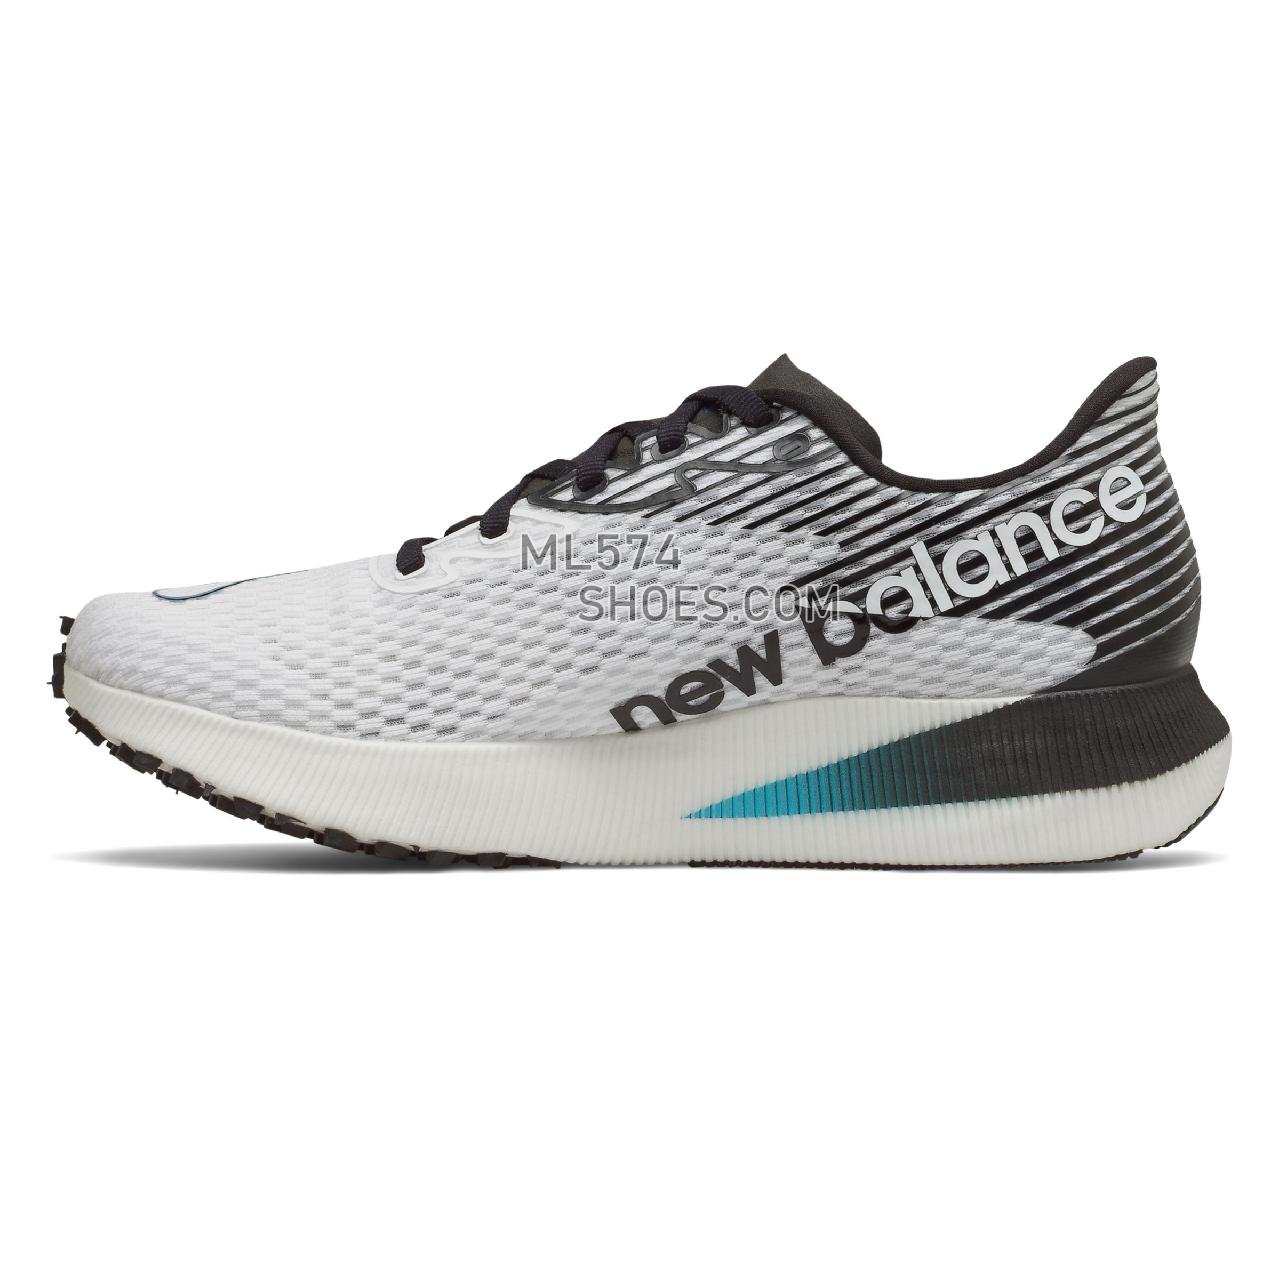 New Balance FuelCell RC Elite - Women's Track Spikes And Cross Country - White with Black and Virtual Sky - WRCELWB